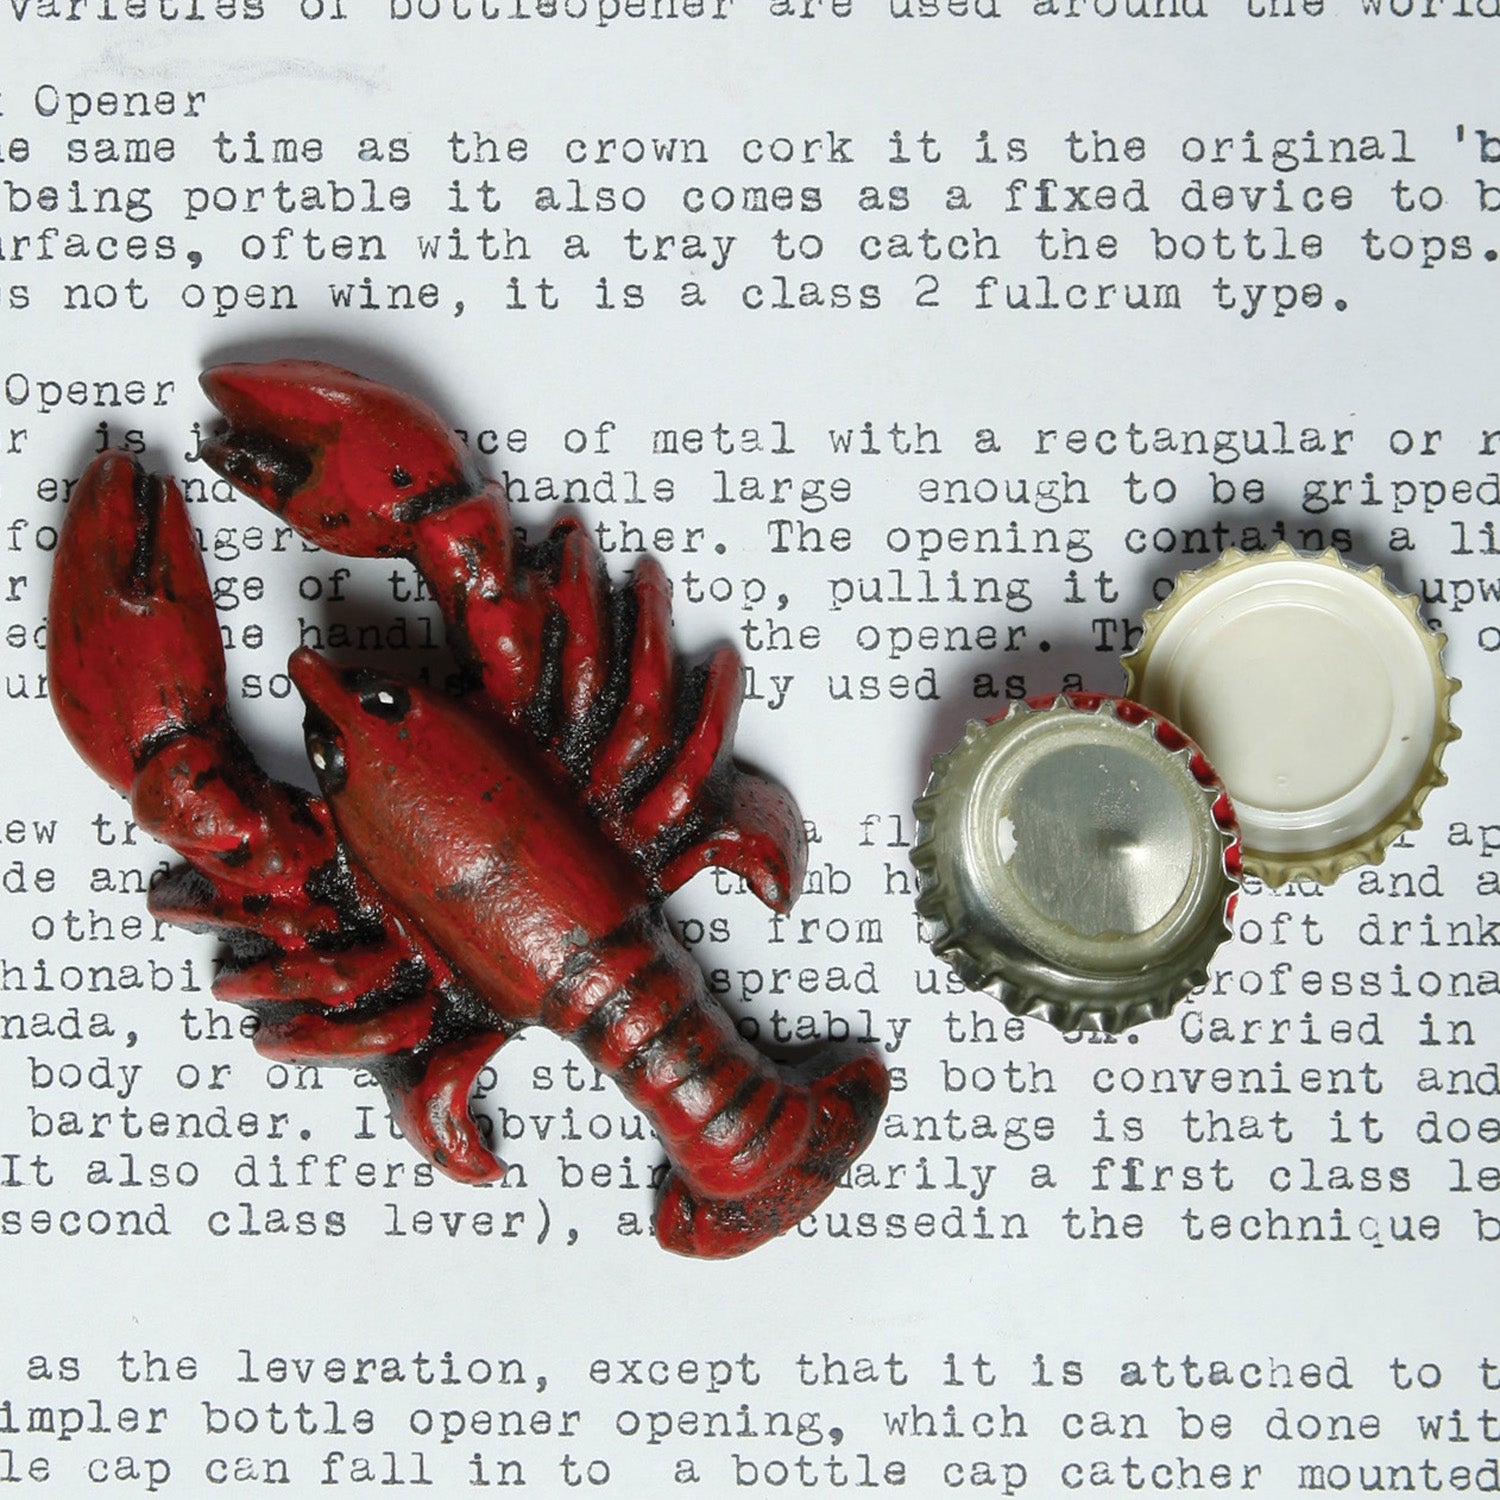 Image of a red cast iron bottle opener next to a bottle cap.